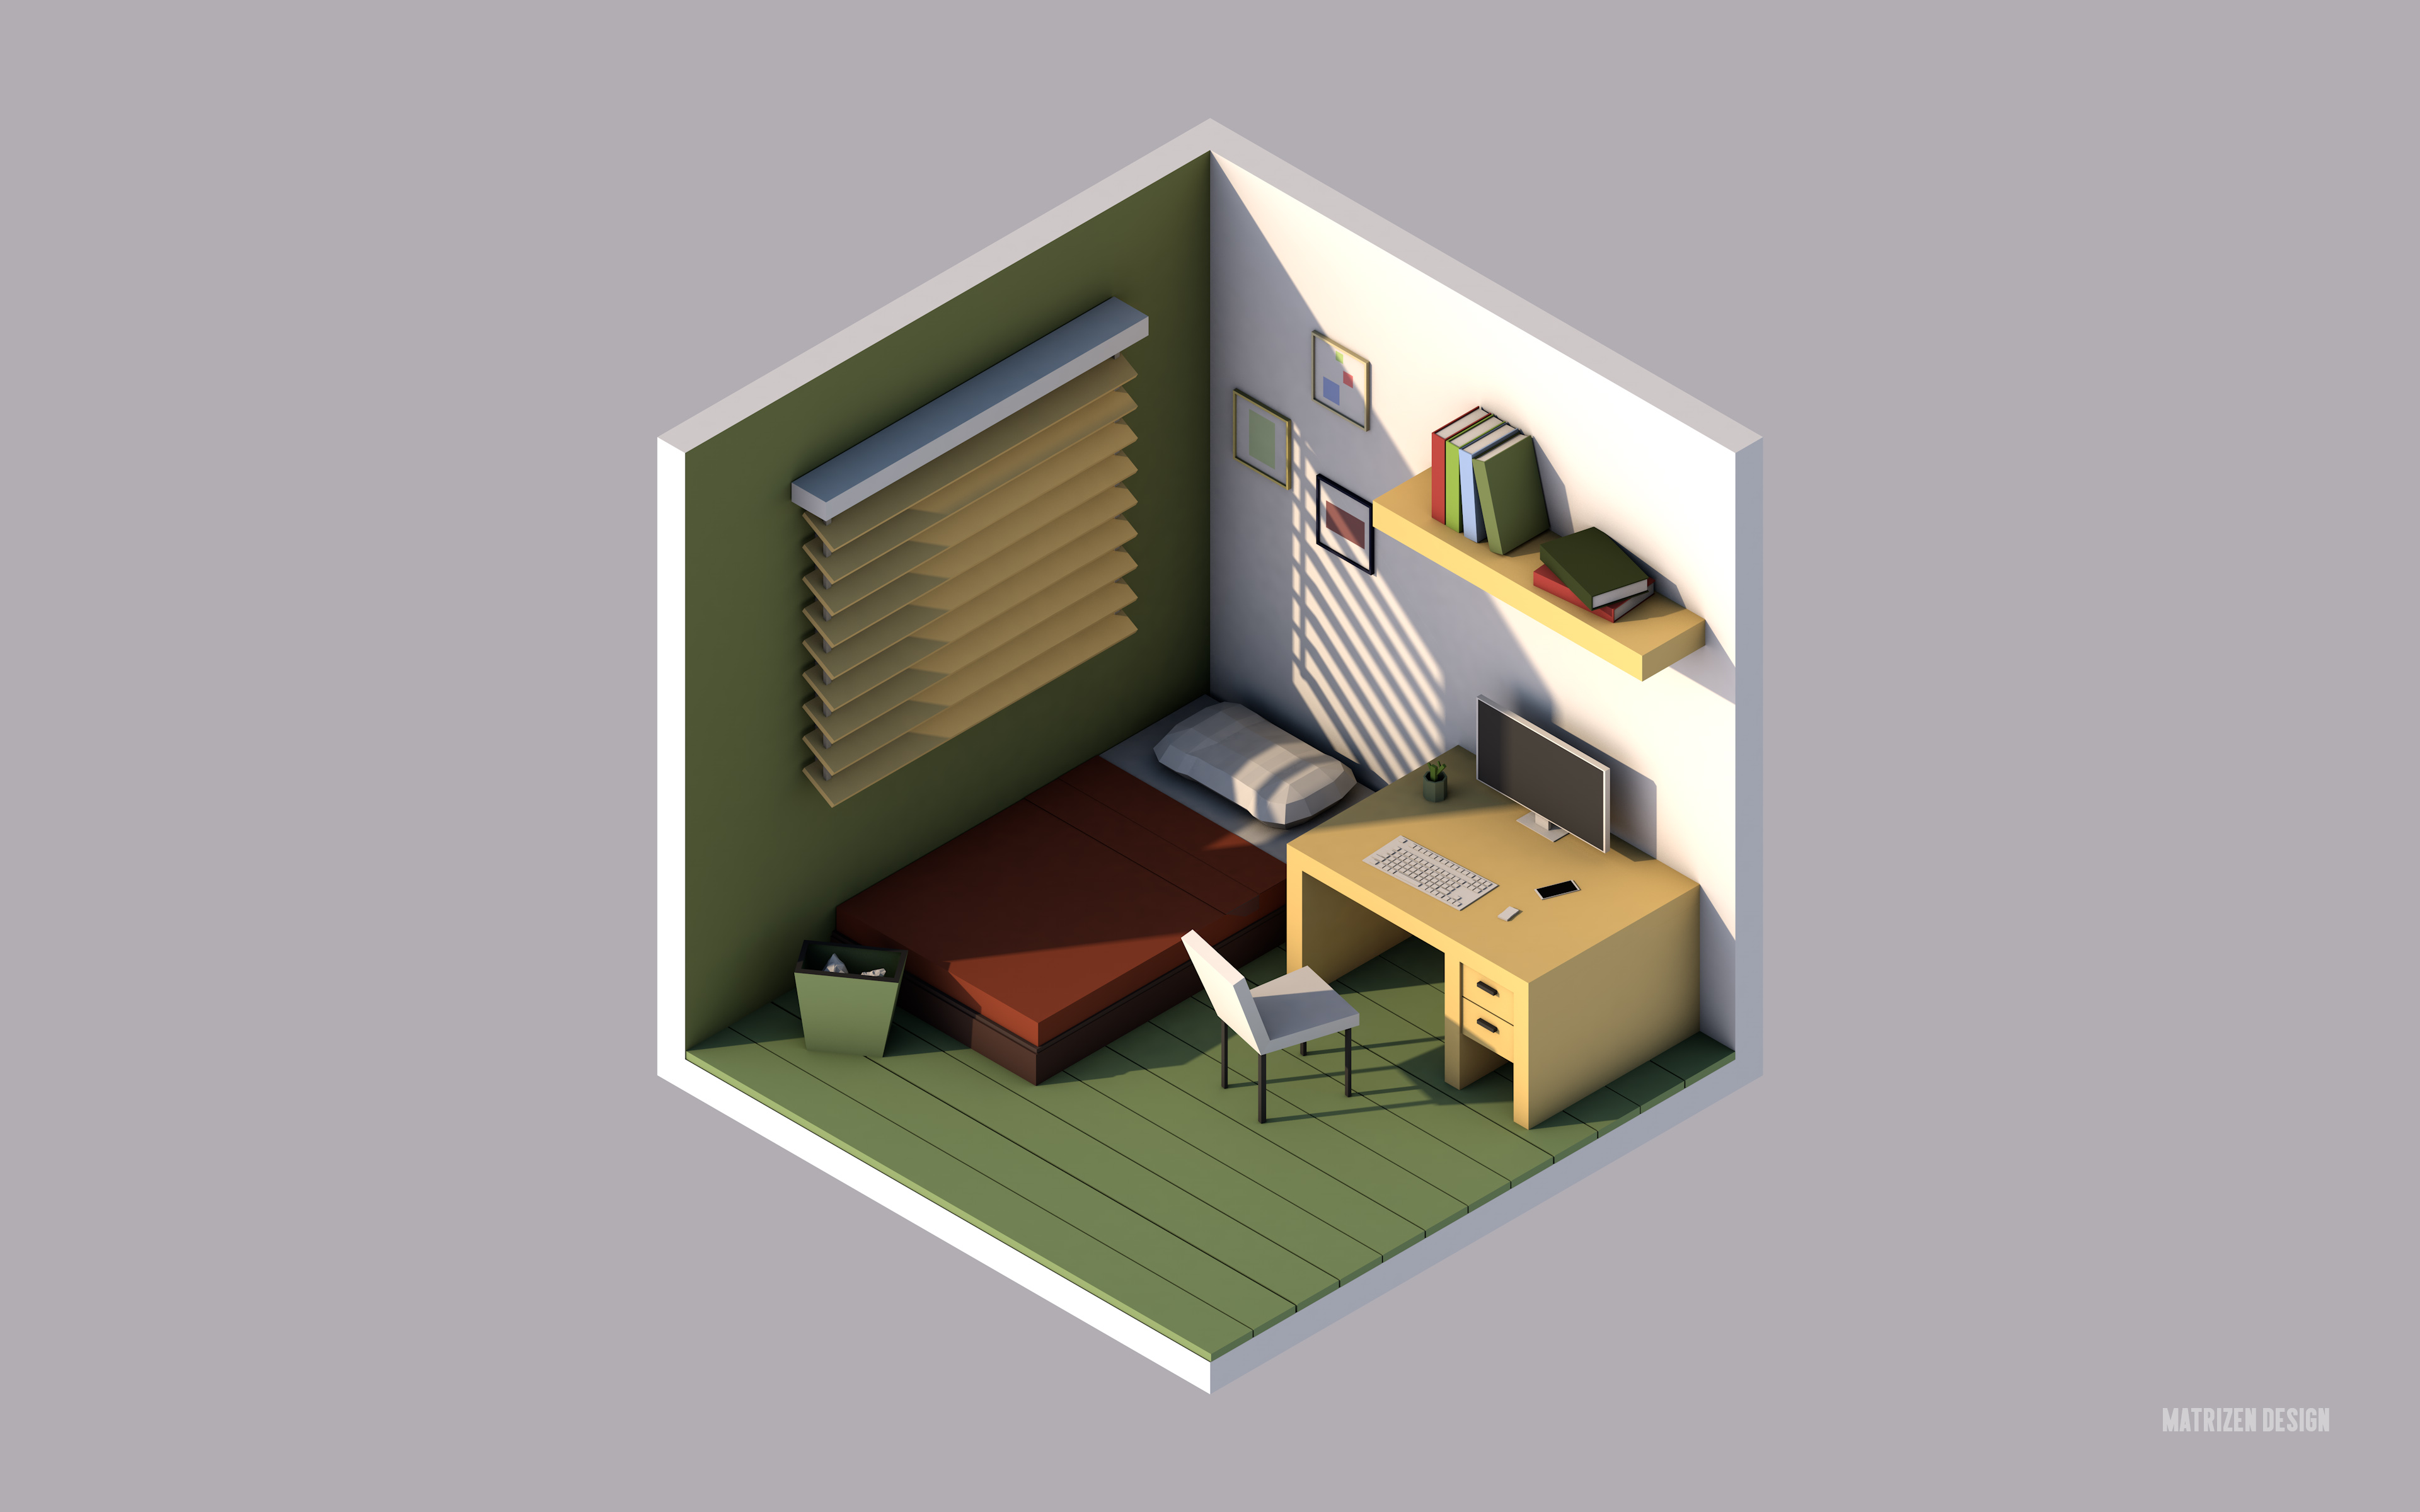 General 3840x2400 low poly isometric room bedroom office window sill books monitor desk computer trash Cinema 4D render graphic design modern diorama